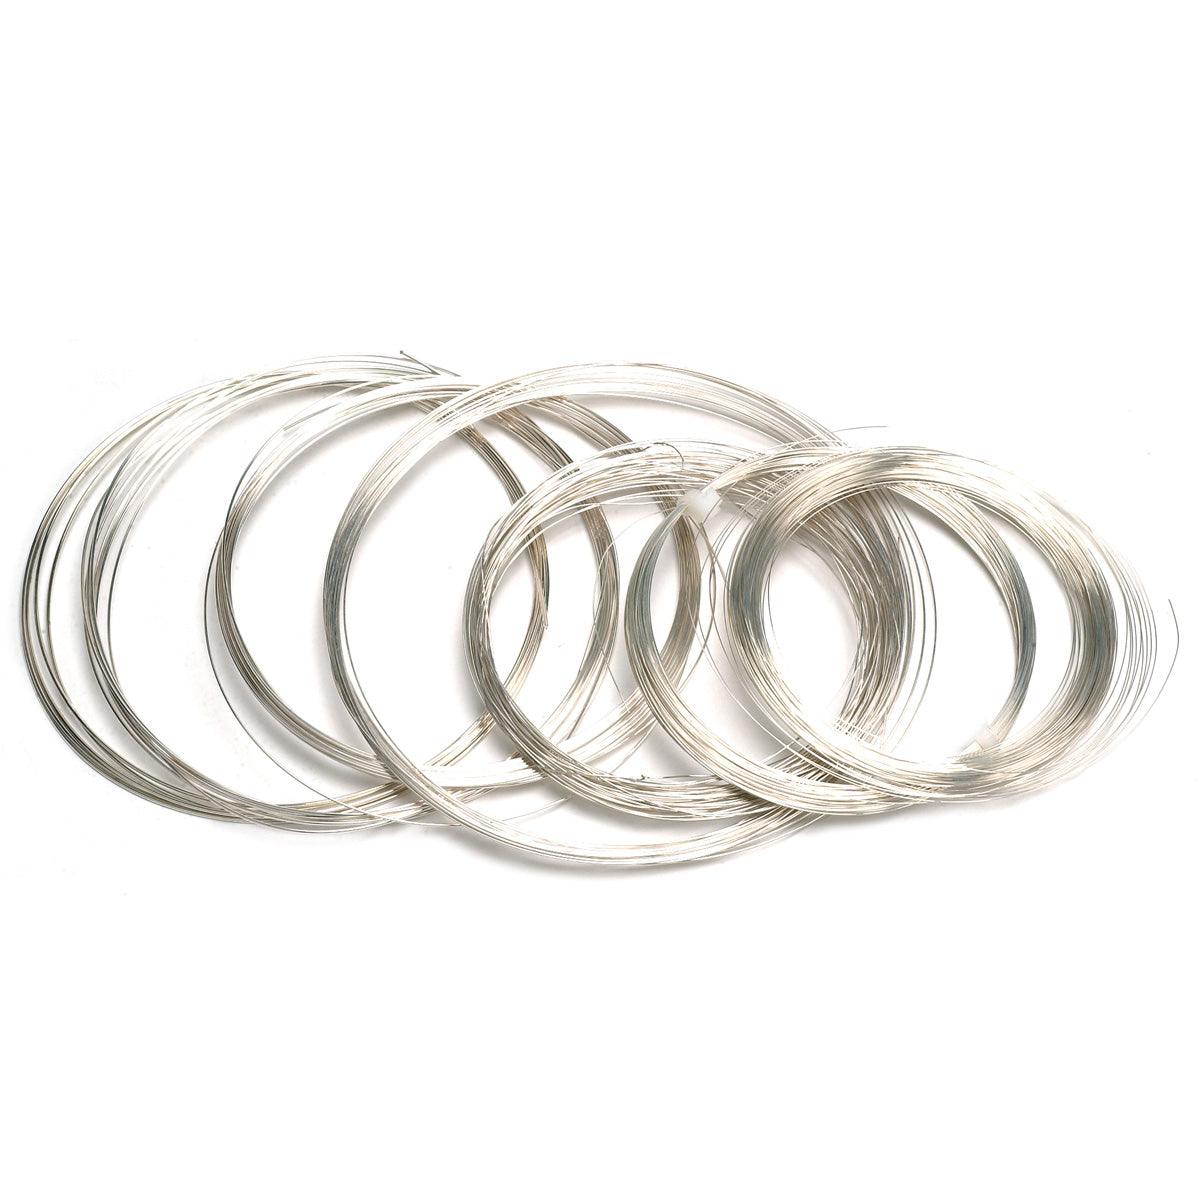 Ring Wire, Double Half Round, 1 Ft 14 Gauge Wire, Sterling Silver